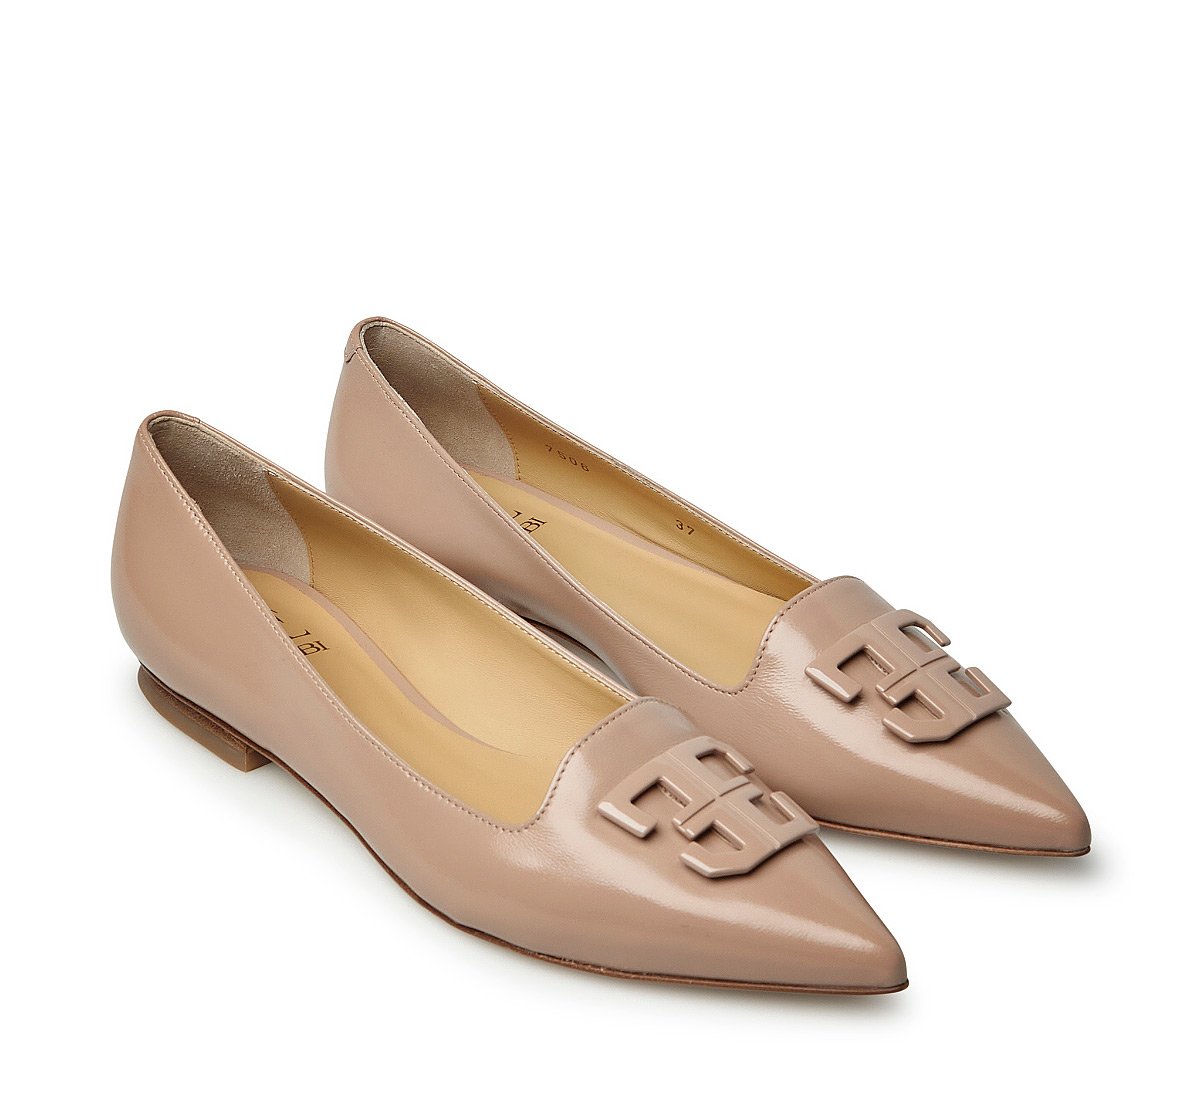 Iconic ballet flats in soft nappa leather